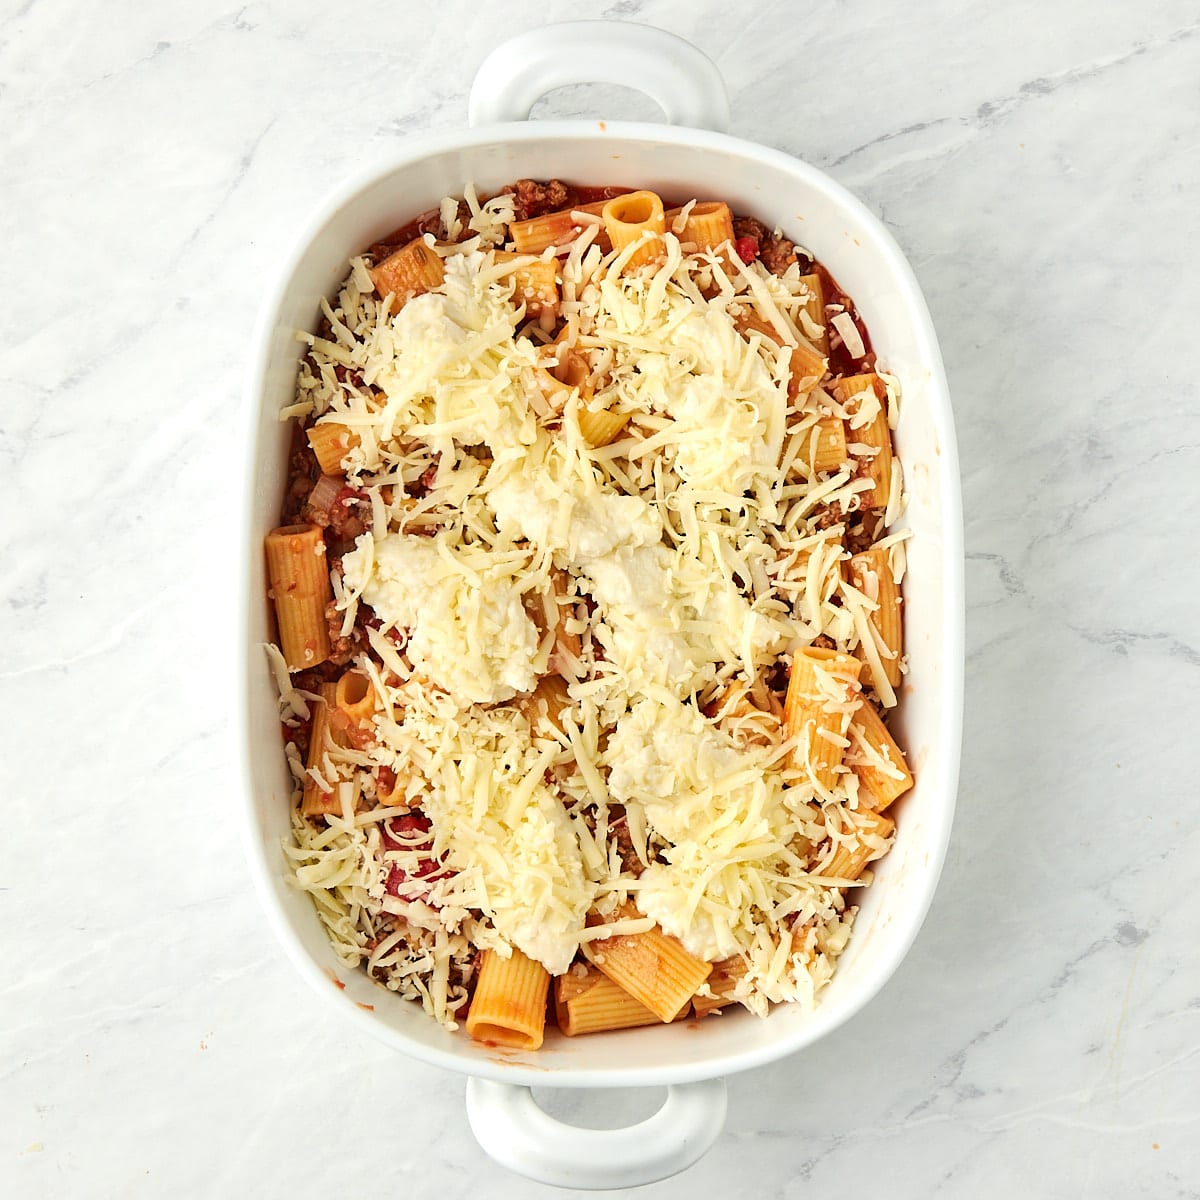 pasta and meat sauce in a casserole dish with dollops of ricotta and shredded mozzarella.